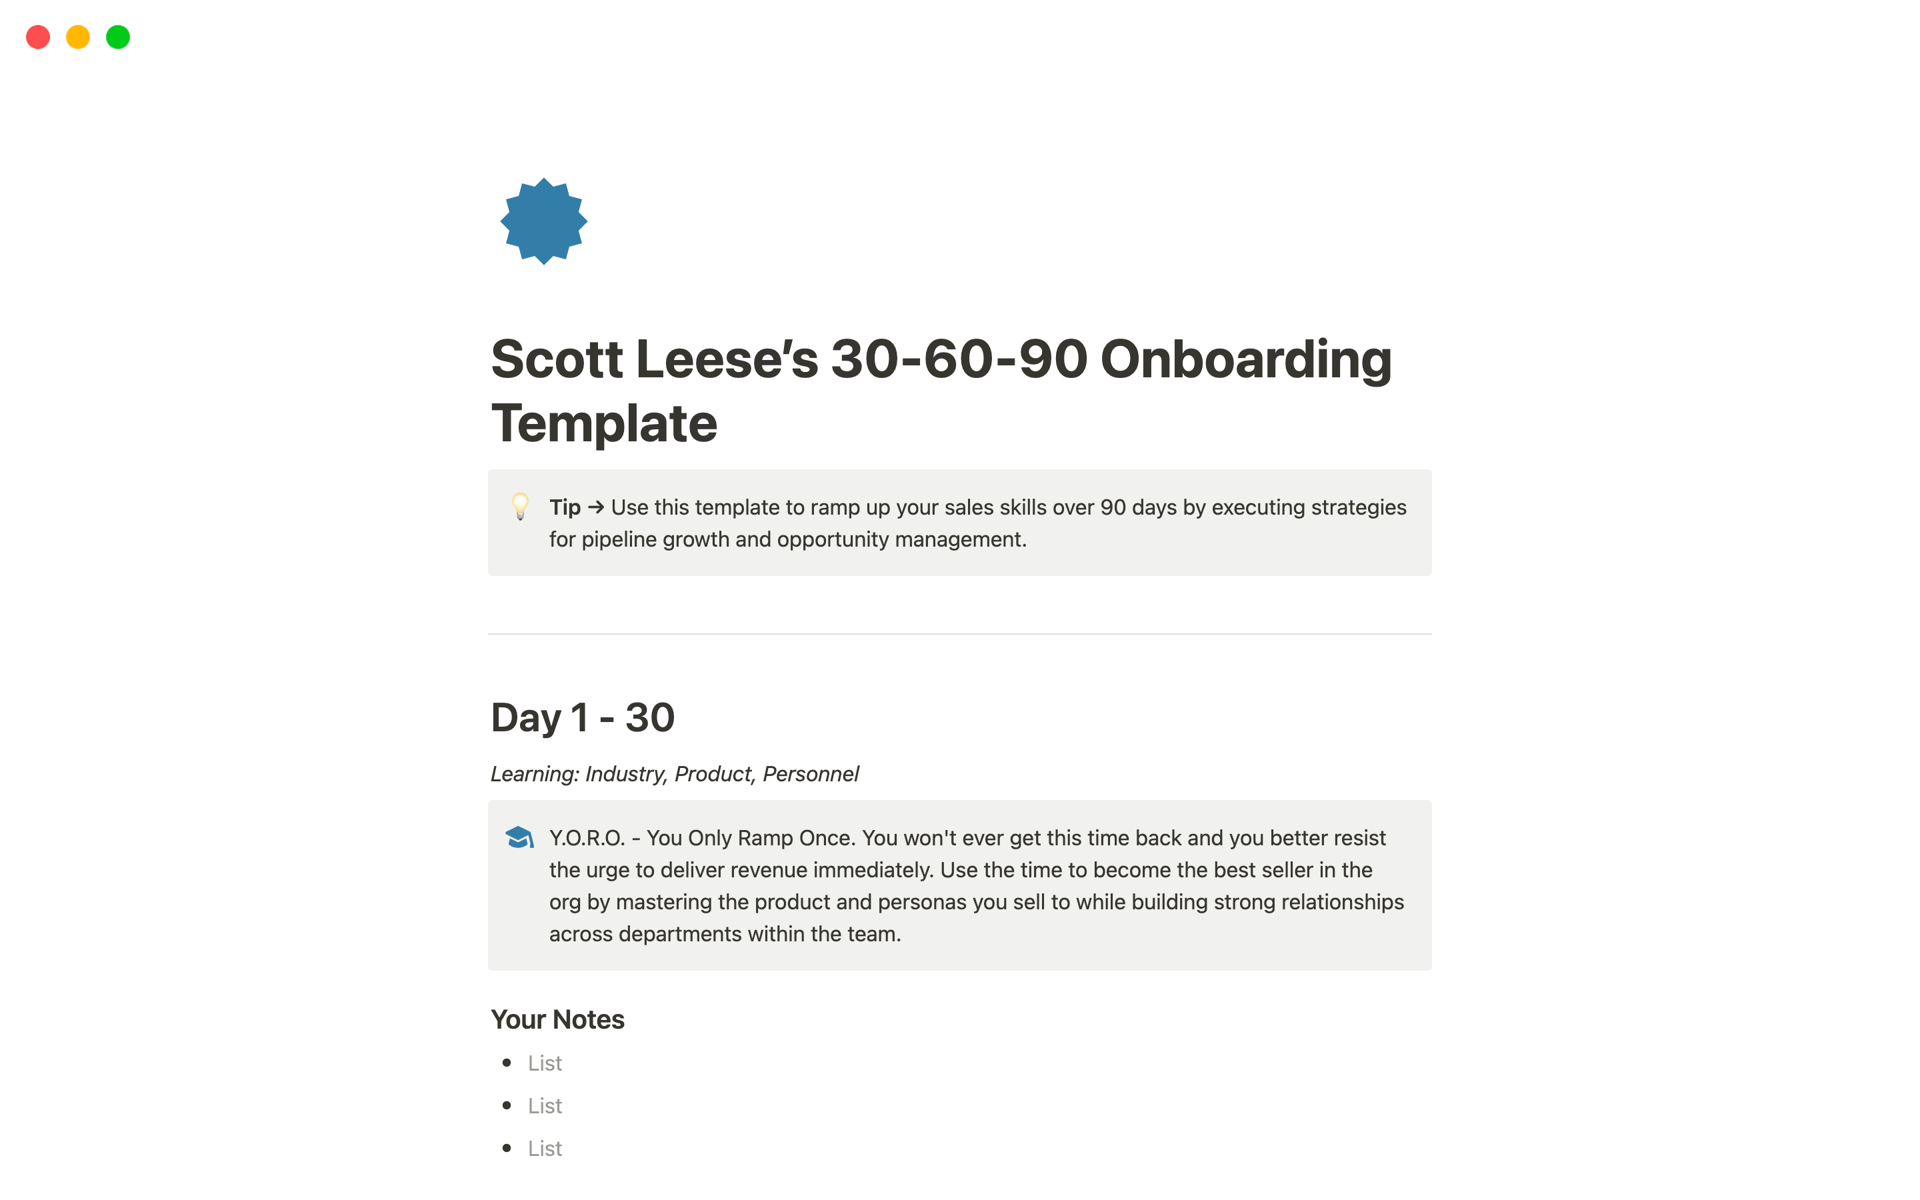 A template preview for 30-60-90 Onboarding